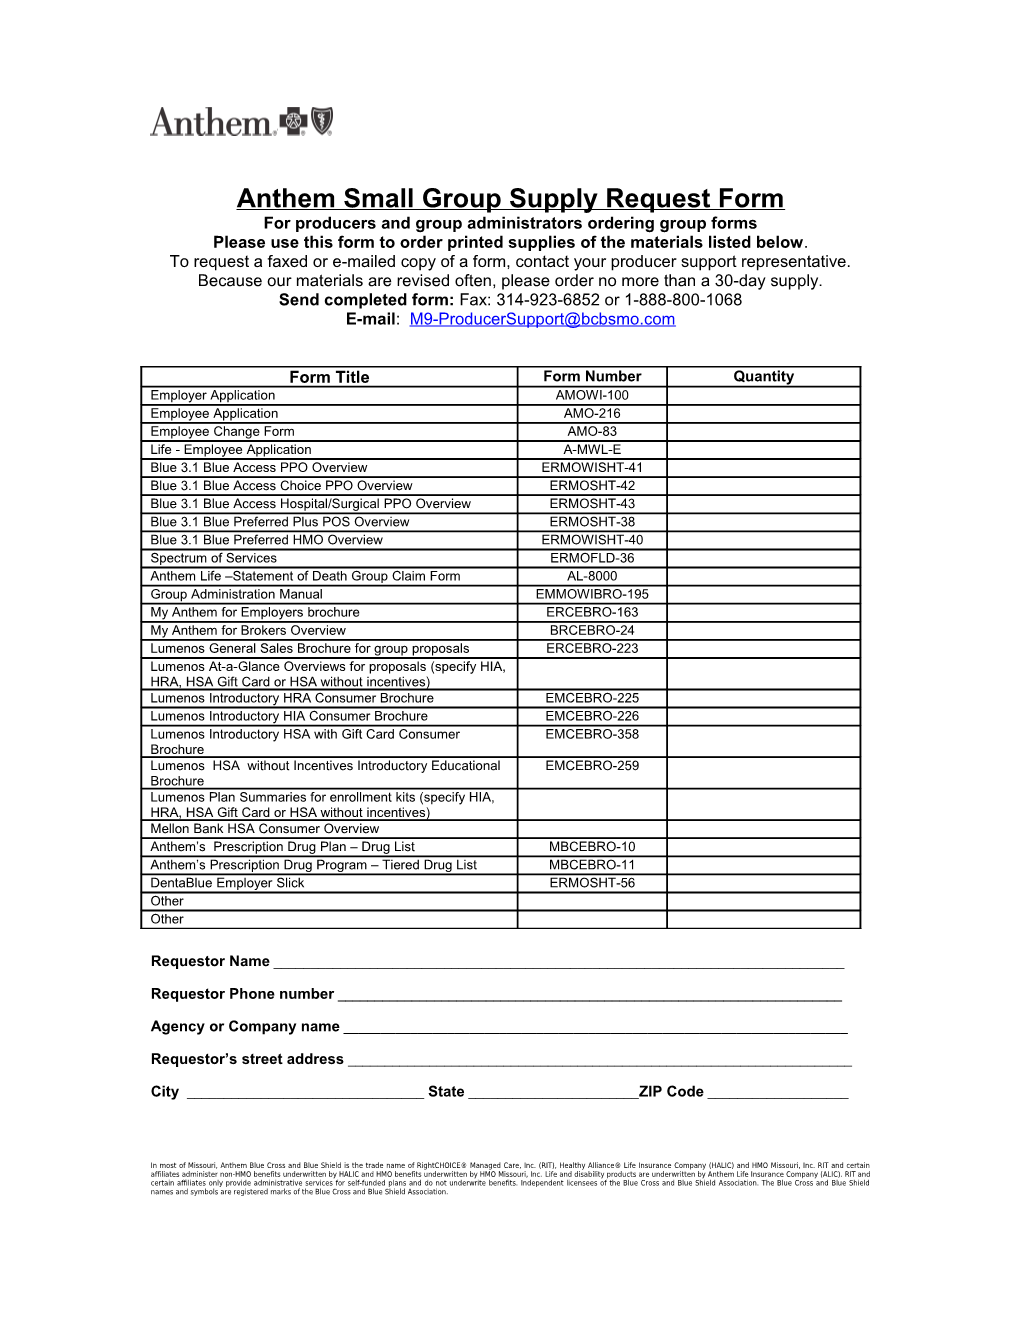 Anthem Producer Or Group Supply Request Form